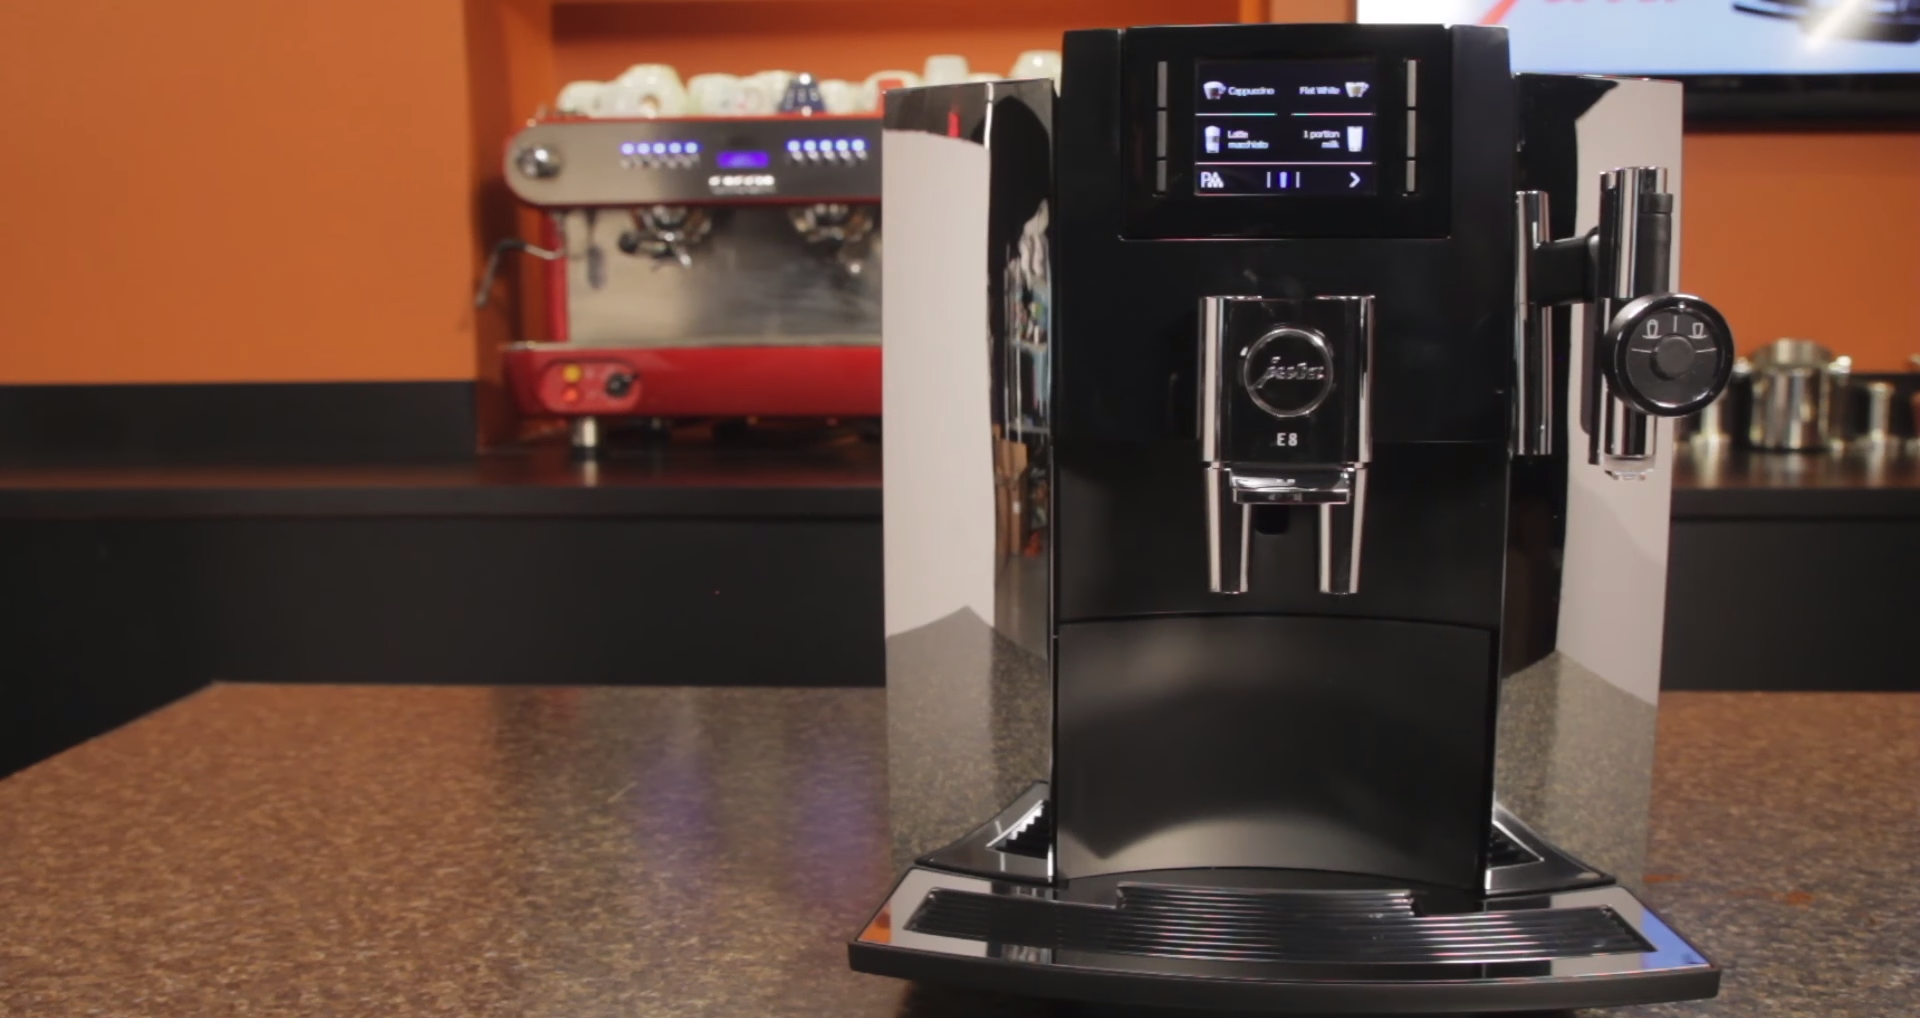 Unboxing the Behmor Brazen 2.0 *We Love This Brewer!* 